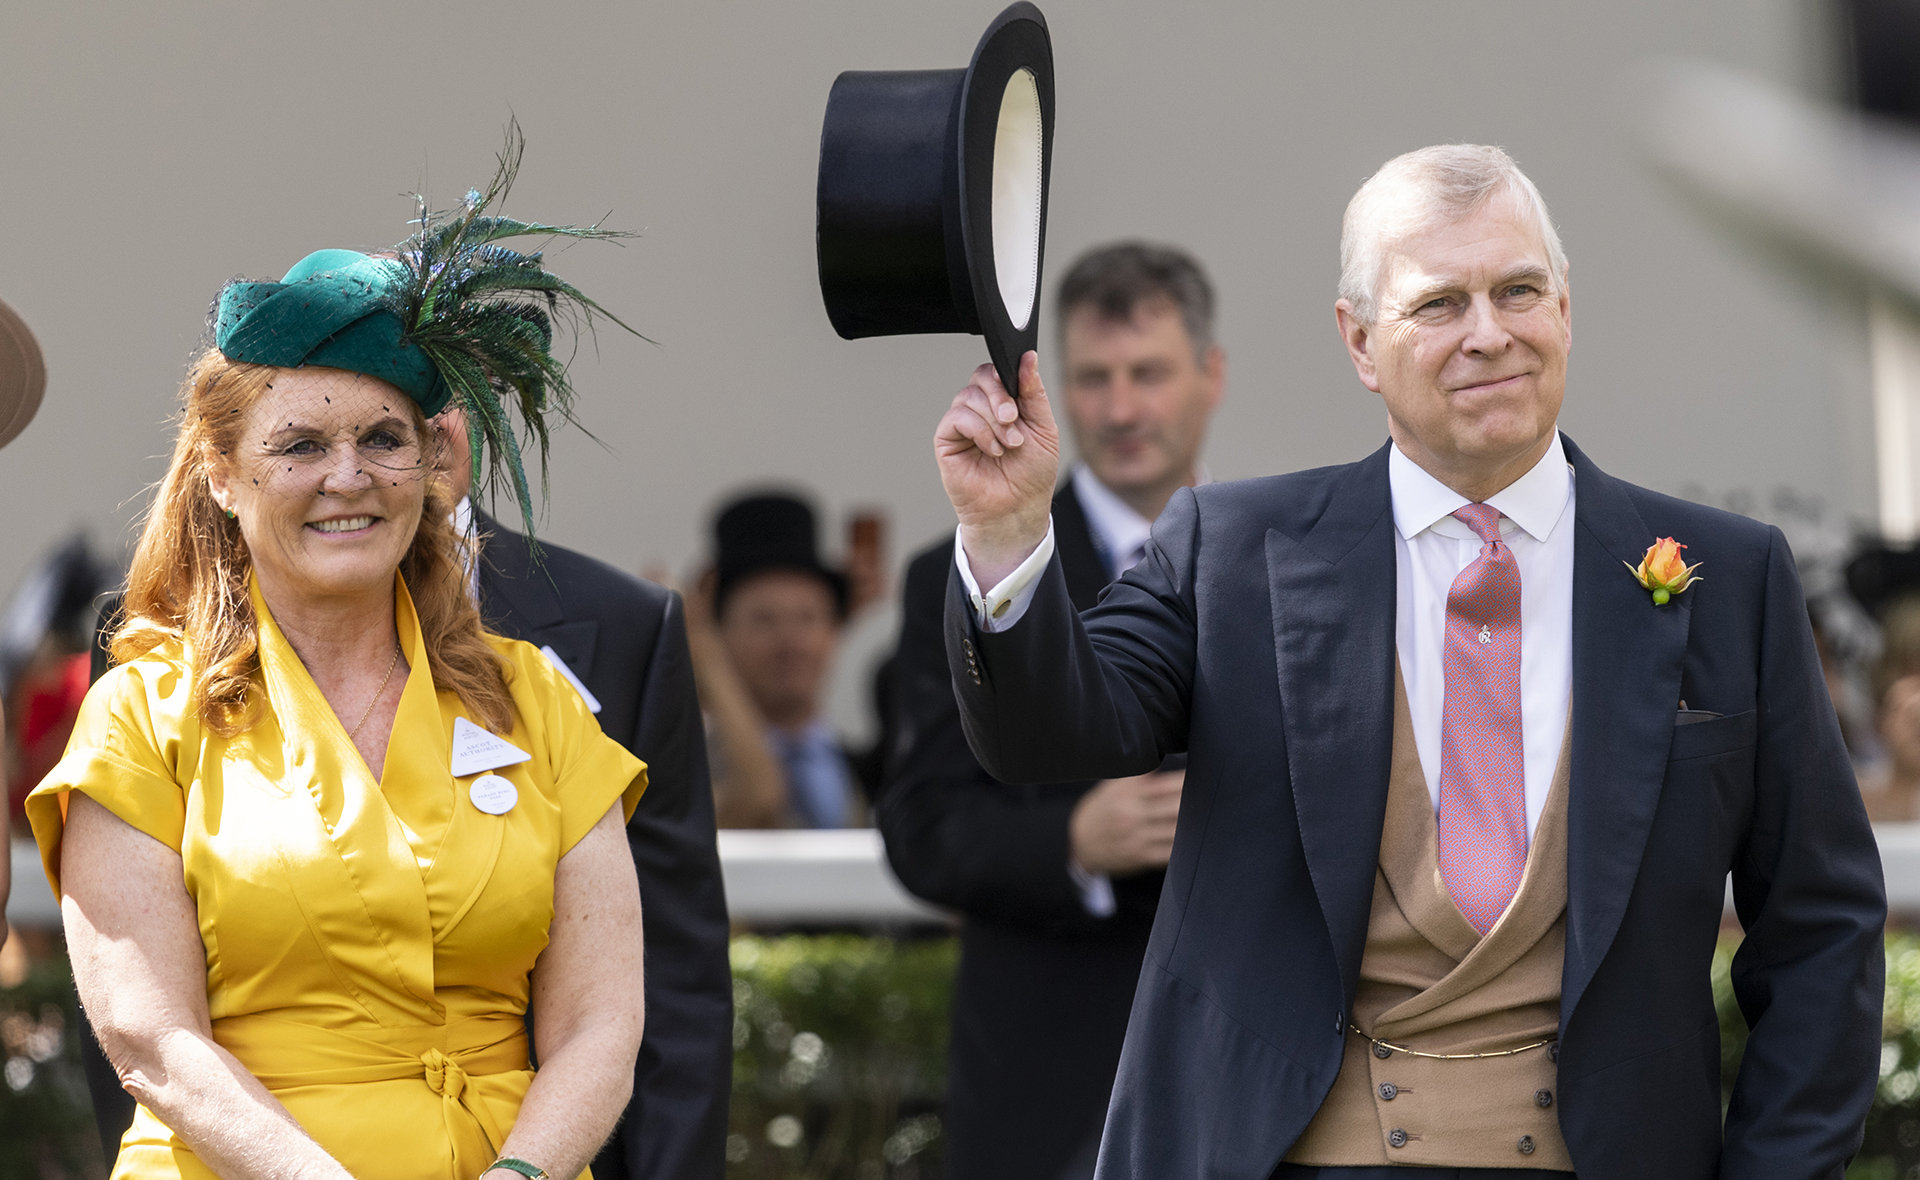 Rumours that Prince Andrew and Sarah, Duchess of York might remarry are swirling again